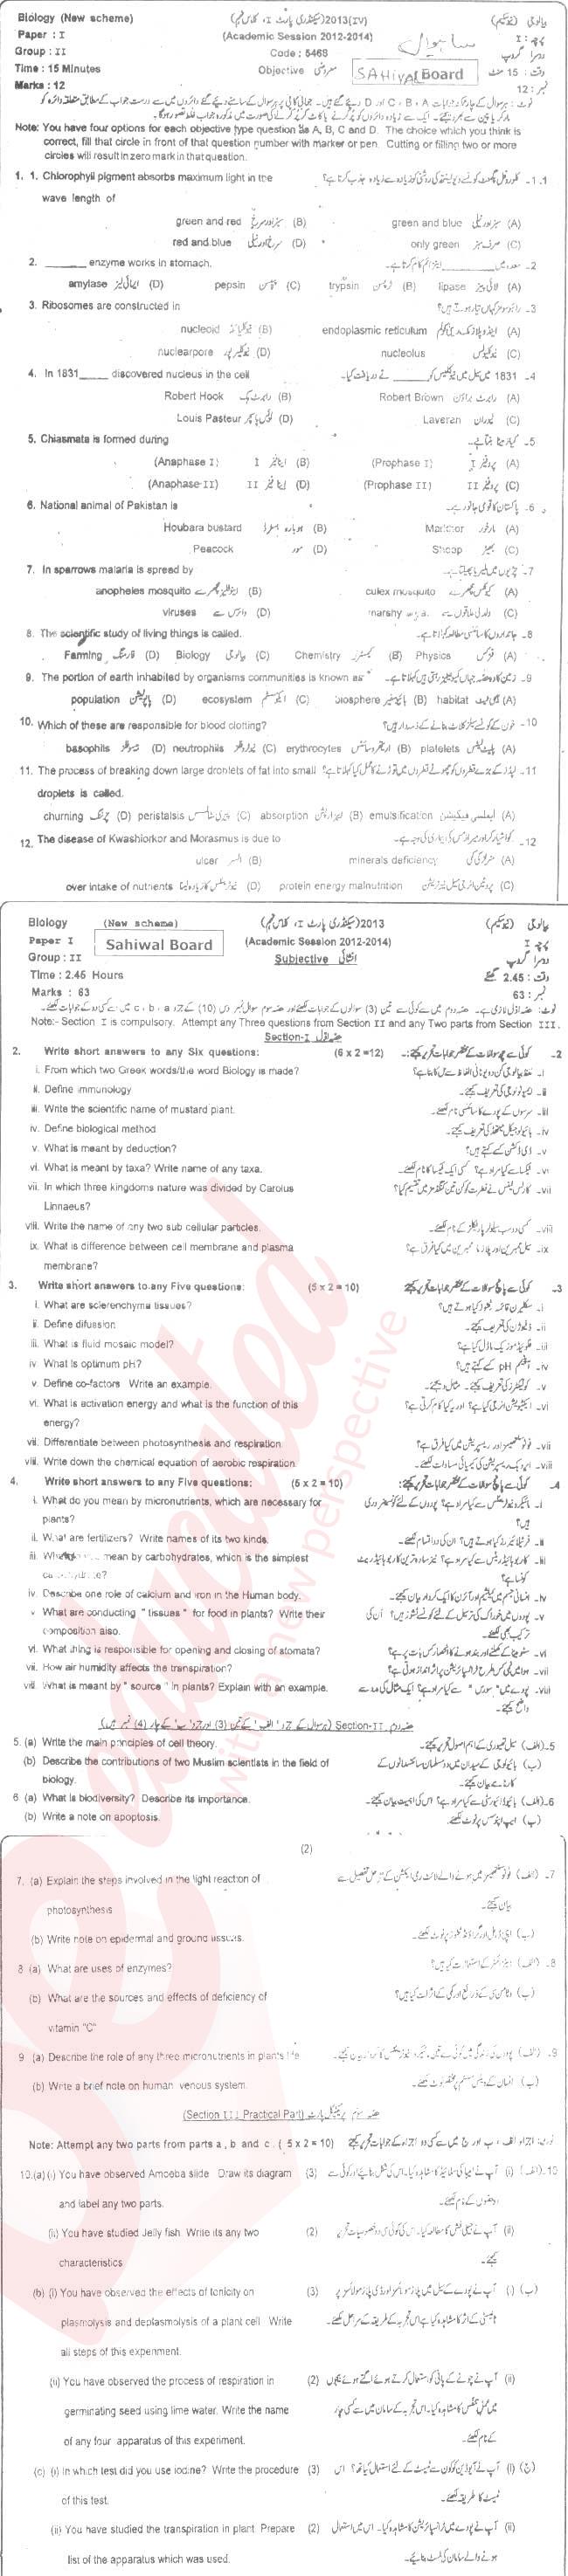 Biology 9th class Past Paper Group 2 BISE Sahiwal 2013